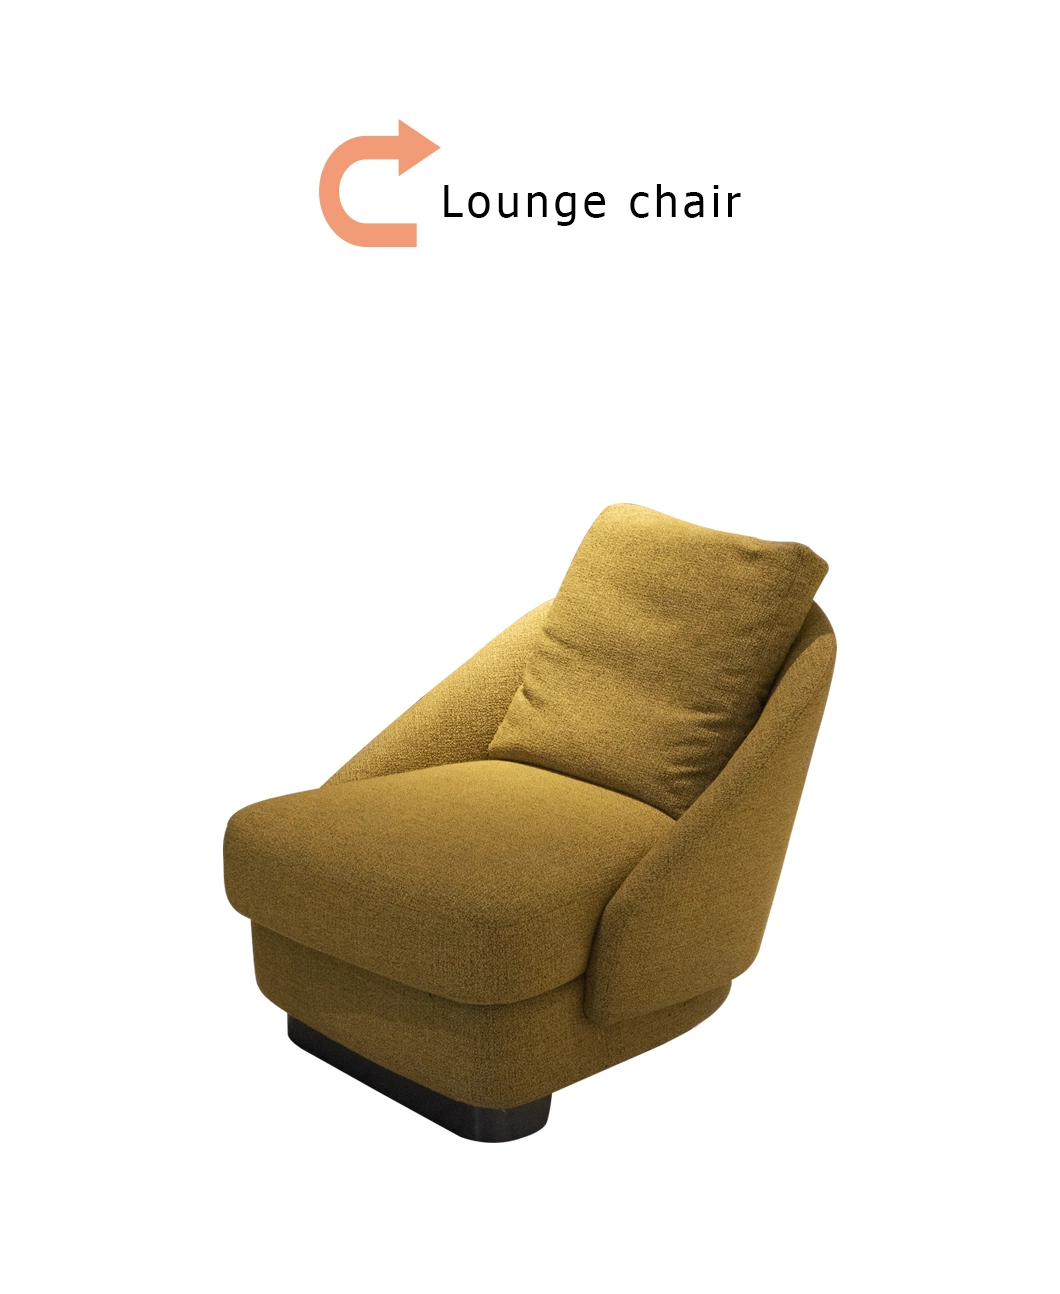 Home Furntiure Comfortable Relax Chair with Cushion for The Indoor Lounge Chair